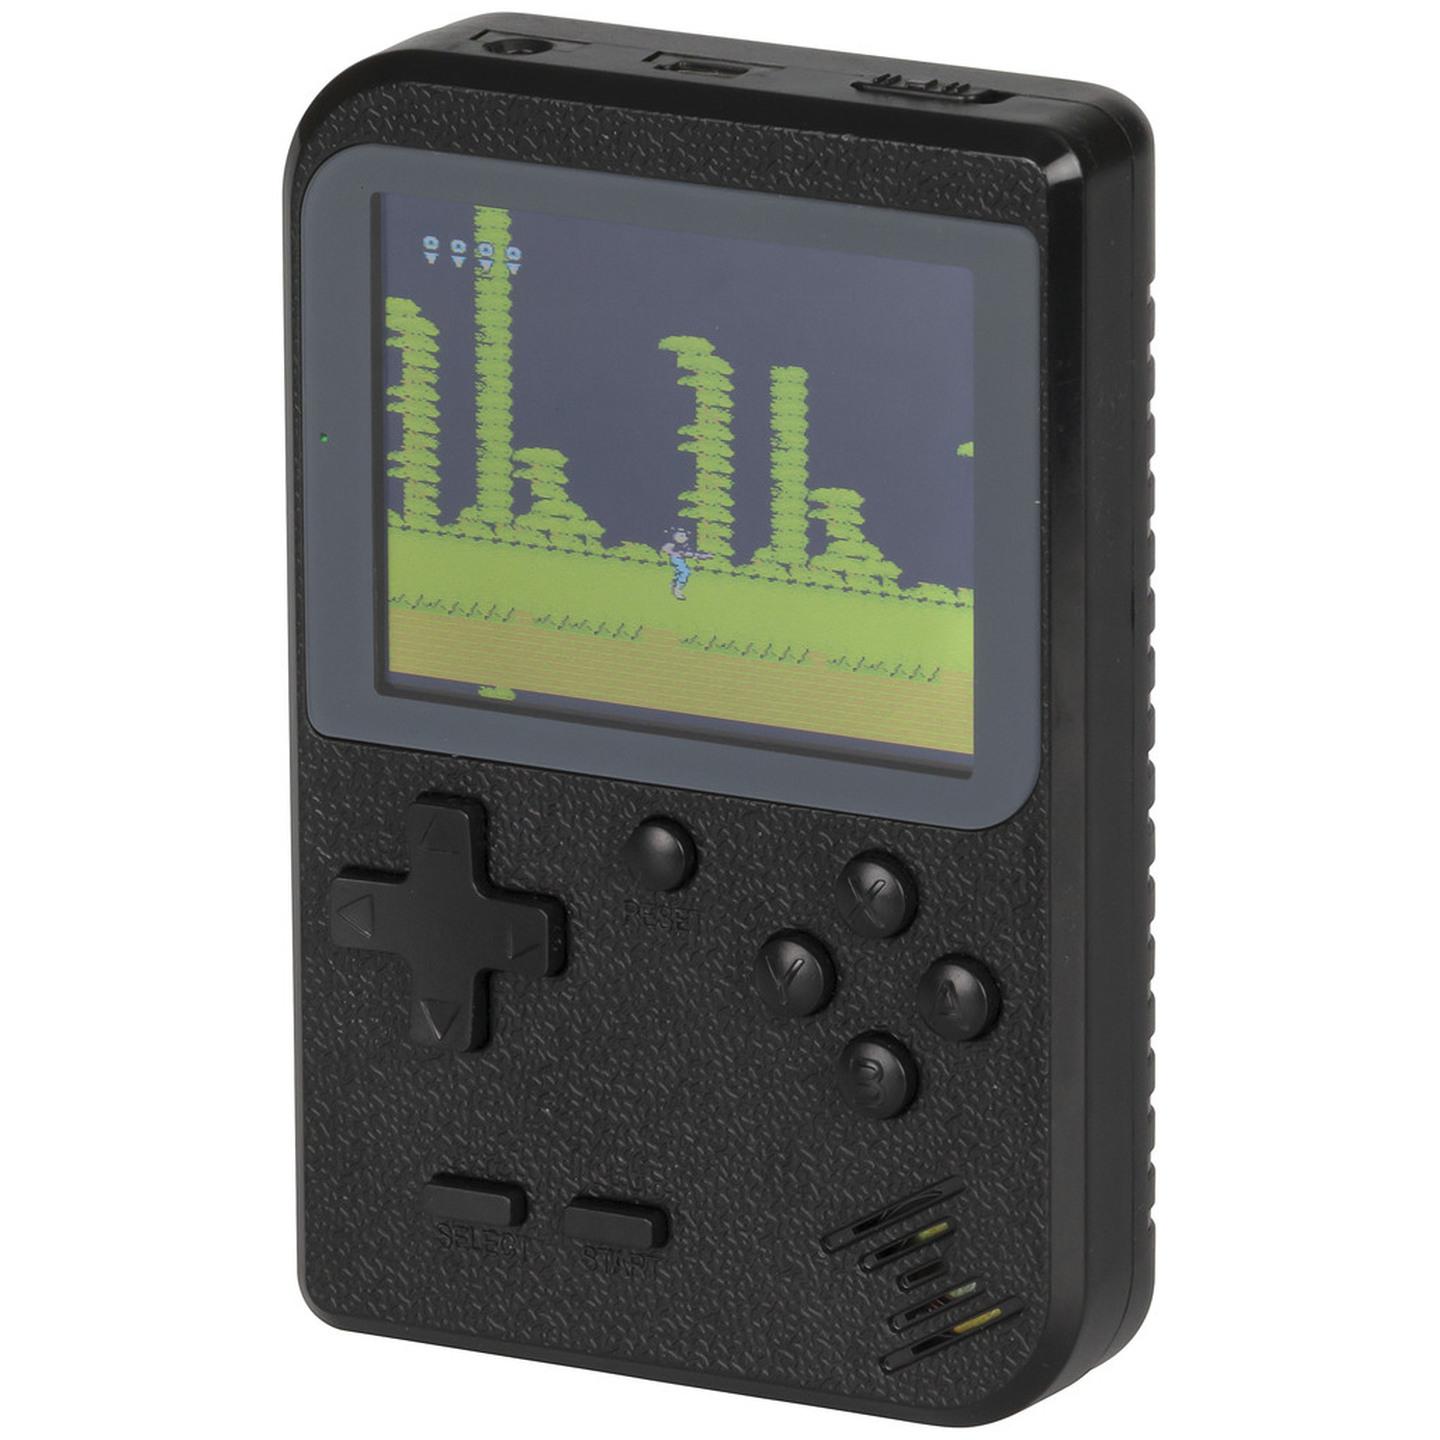 Handheld Game Console with 256 Games